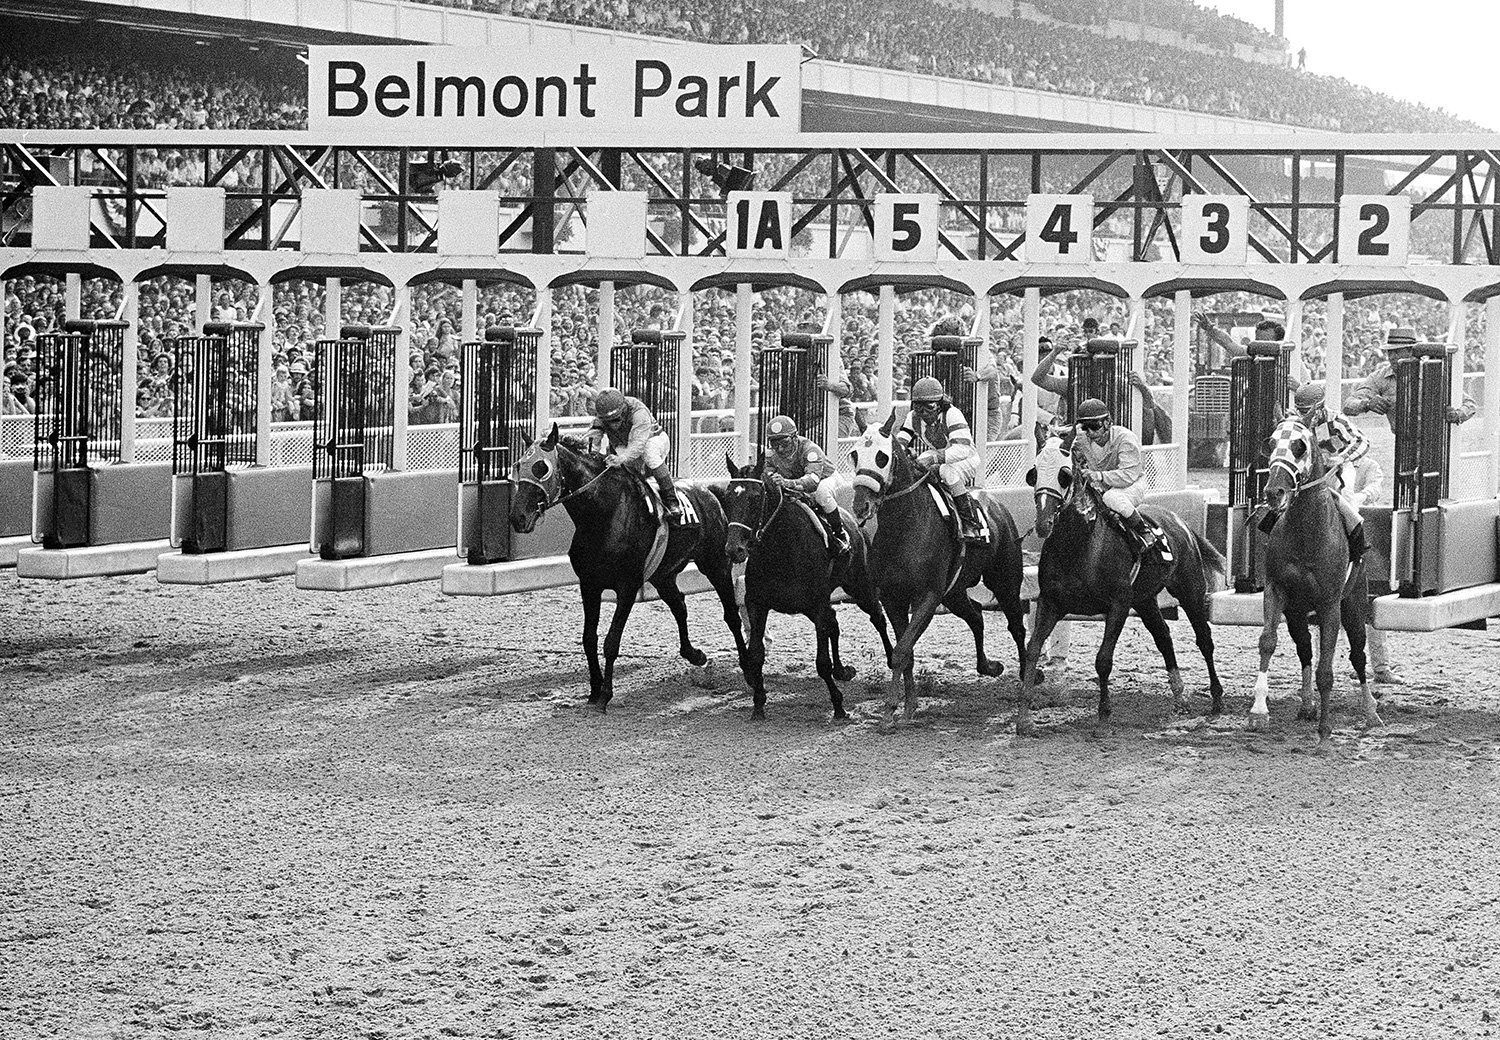  The field horses entered in the Belmont Stakes leave the starting gate in Belmont Park in Elmont, N.Y., June 9, 1973. From left, are, Sham; Twice a Prince; My Gallant; Pvt. Smiles, and Secretariat, who won the race and racing's Triple Crown. Secreta